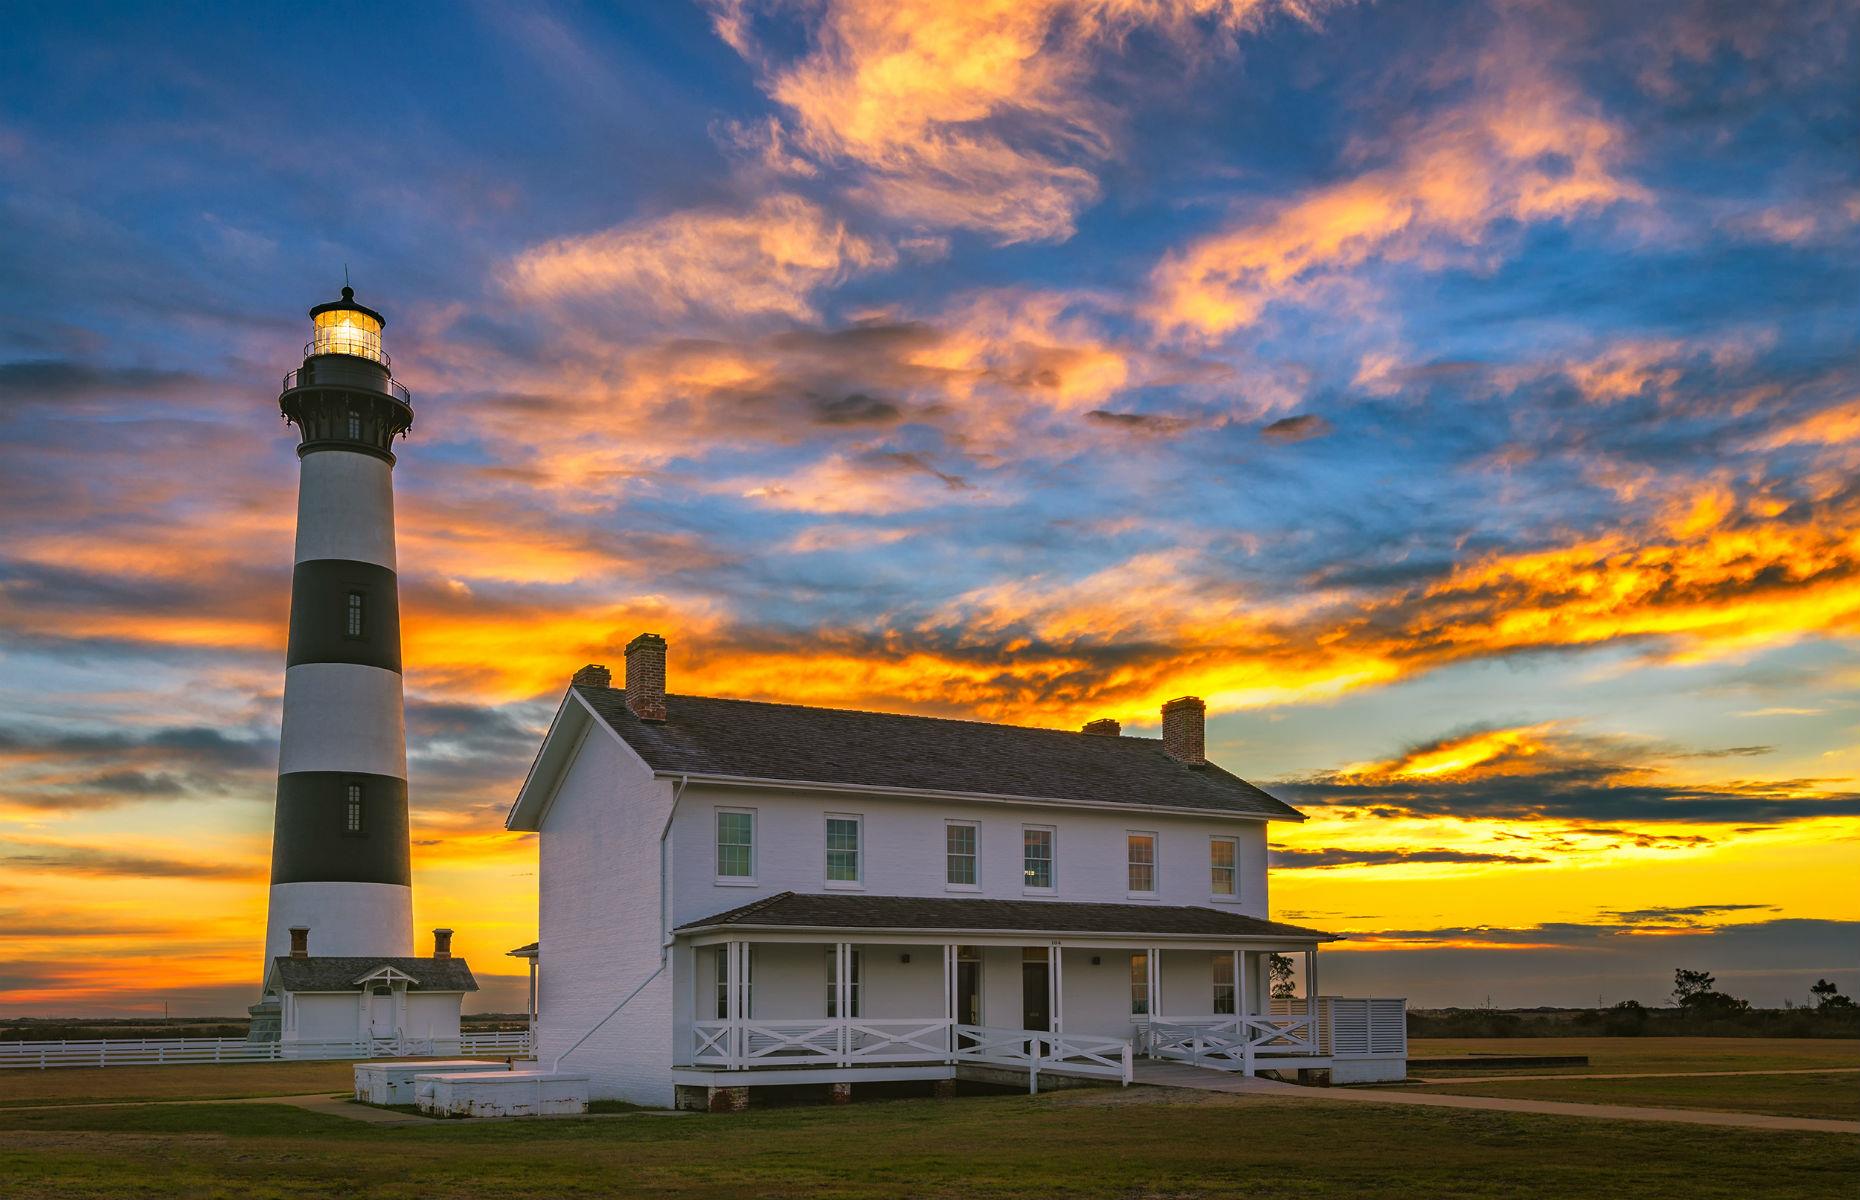 <p>Opened in 1872, this black-and-white striped wonder on the Cape Hatteras National Seashore stands at 156 feet (47.5m) tall and is one of the few remaining brick-built lighthouse towers in the US in operation today. A restoration project between 2009 and 2013 ensured that the spiraling 214-step stairway to the top can be climbed by visitors and you can find out about <a href="https://www.nps.gov/caha/planyourvisit/bils.htm">opening times and tours here</a>. </p>